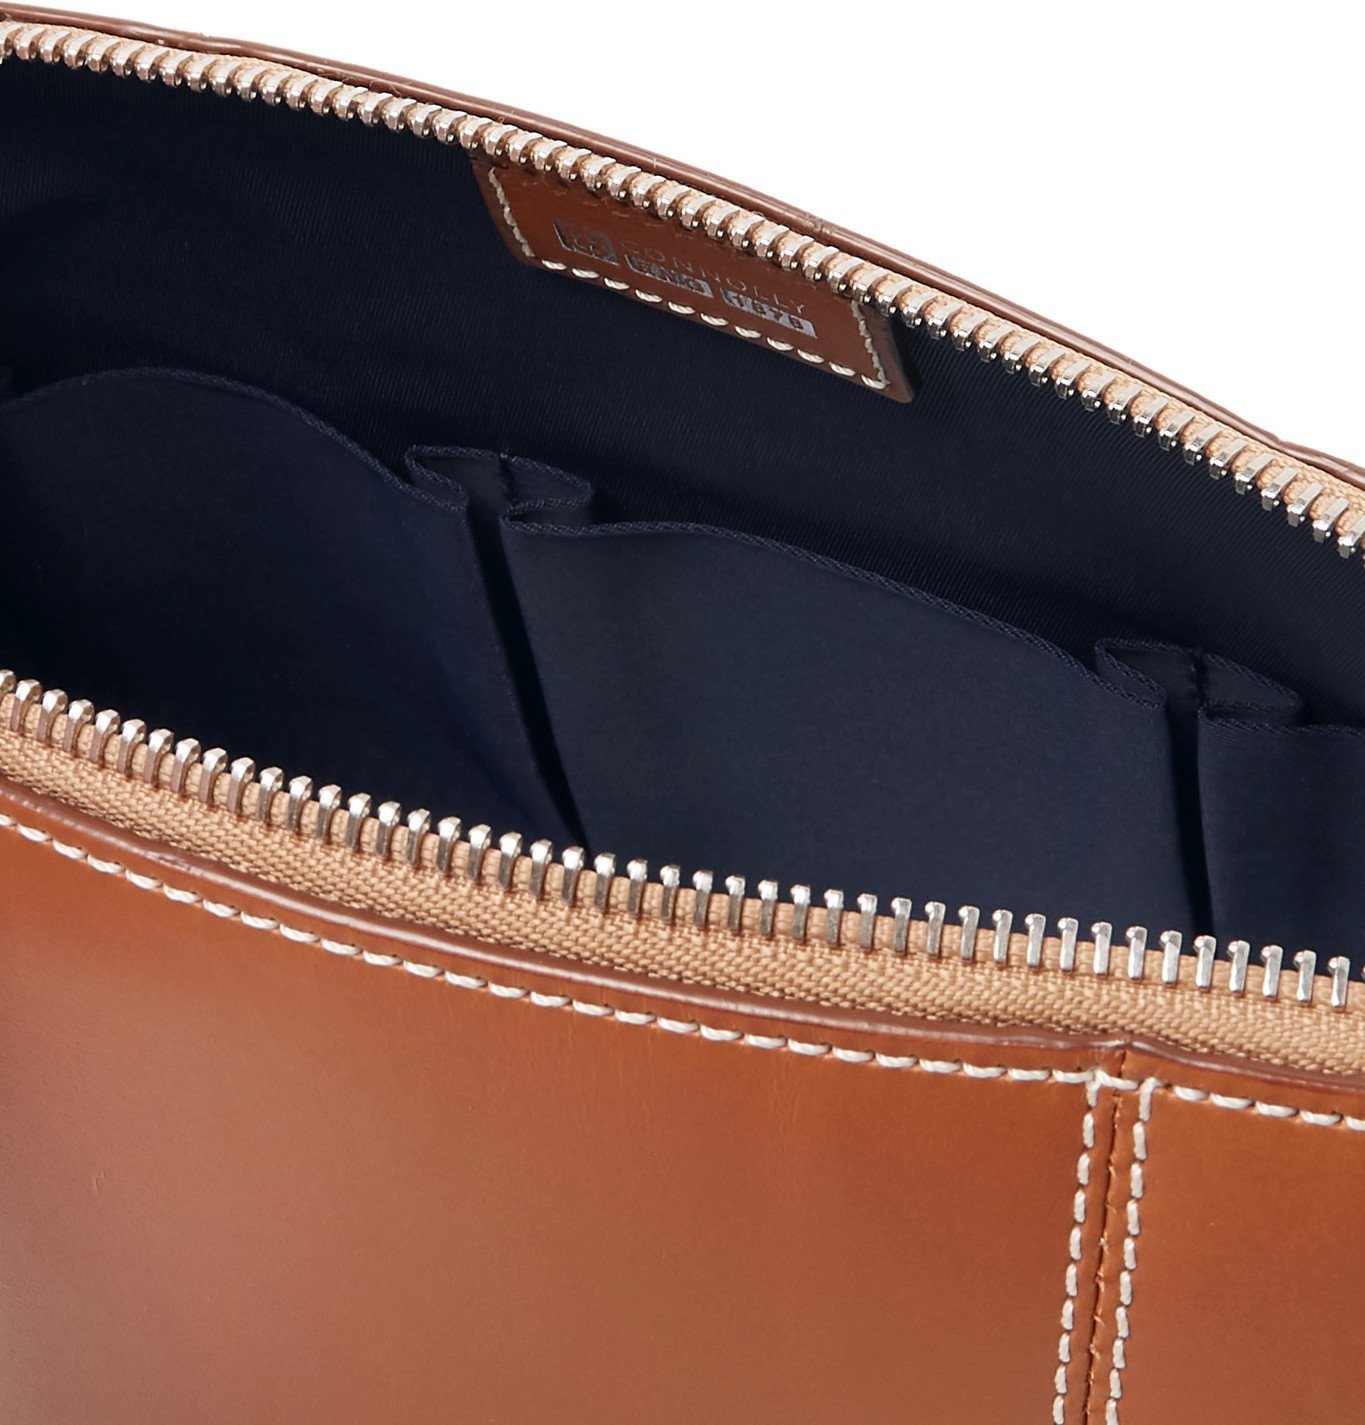 Connolly - Leather Wash Bag - Brown Connolly